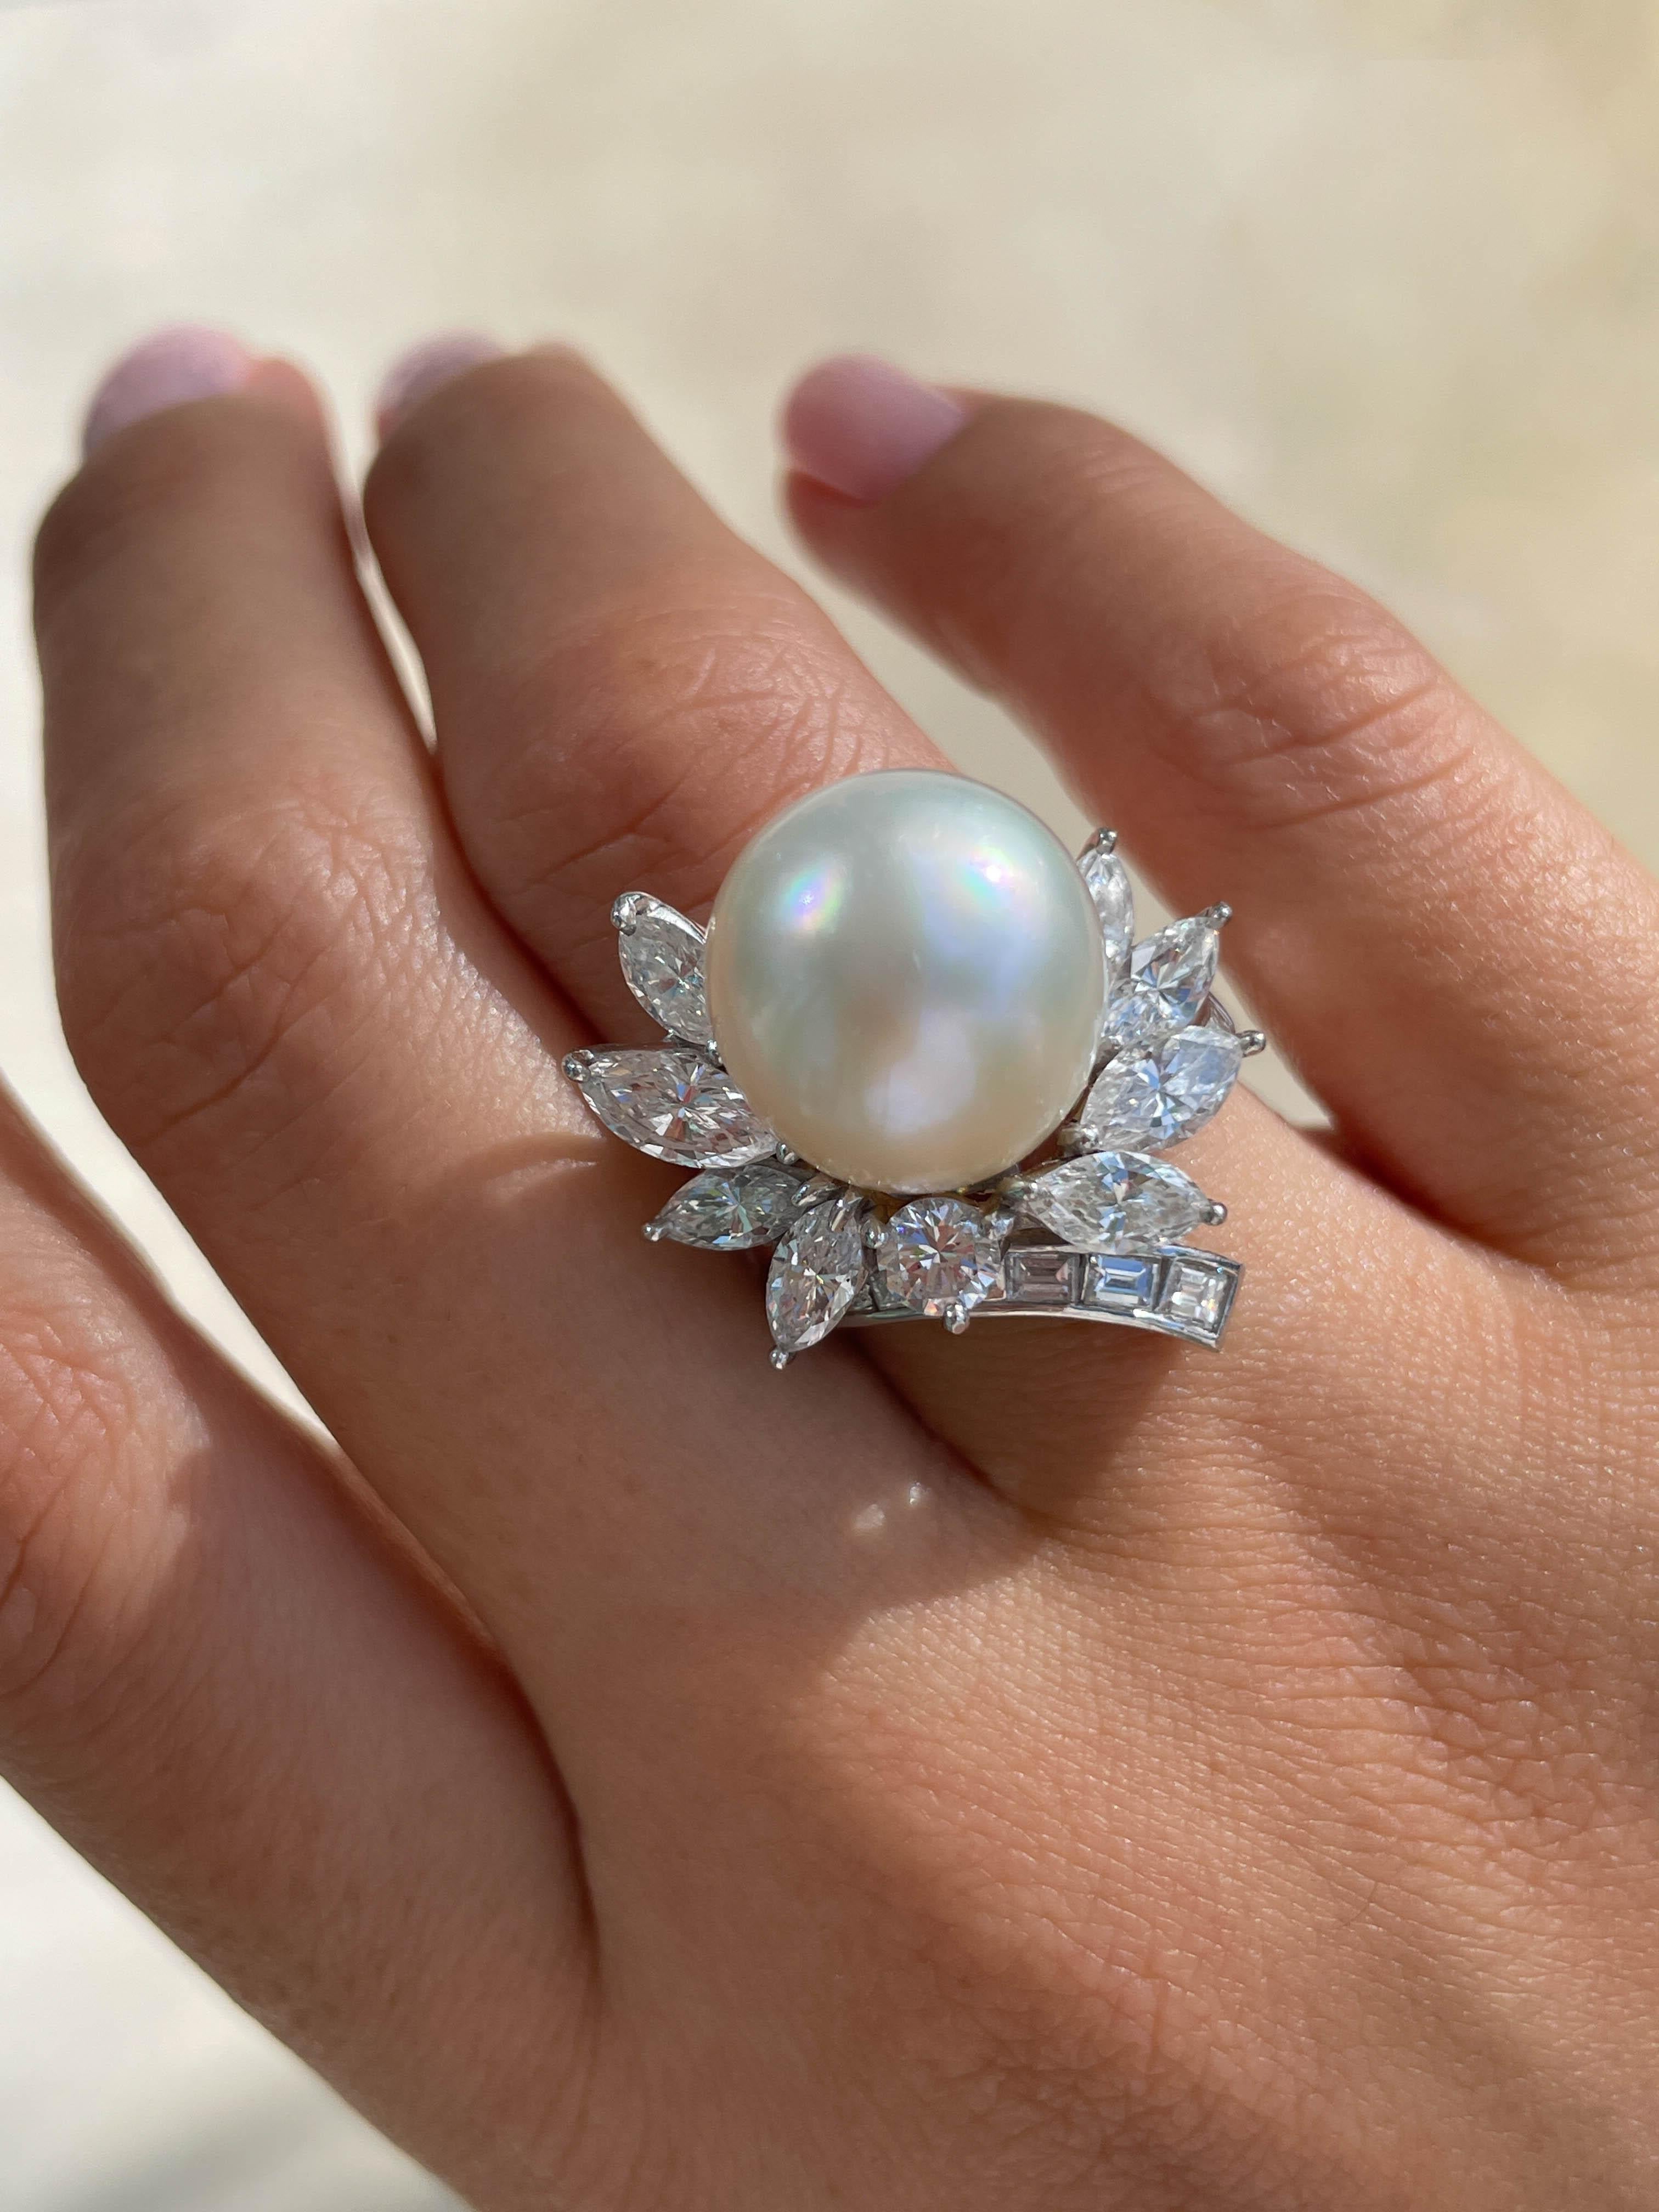 Jay Feder Pearl and Diamond ring in Platinum with 13mm South Sea Pearl in the center set with marquise, round and straight baguette diamonds; estimated total weight is 2.64ctw. 

The top’s measurements are 25x23mm. The band’s width tapers from